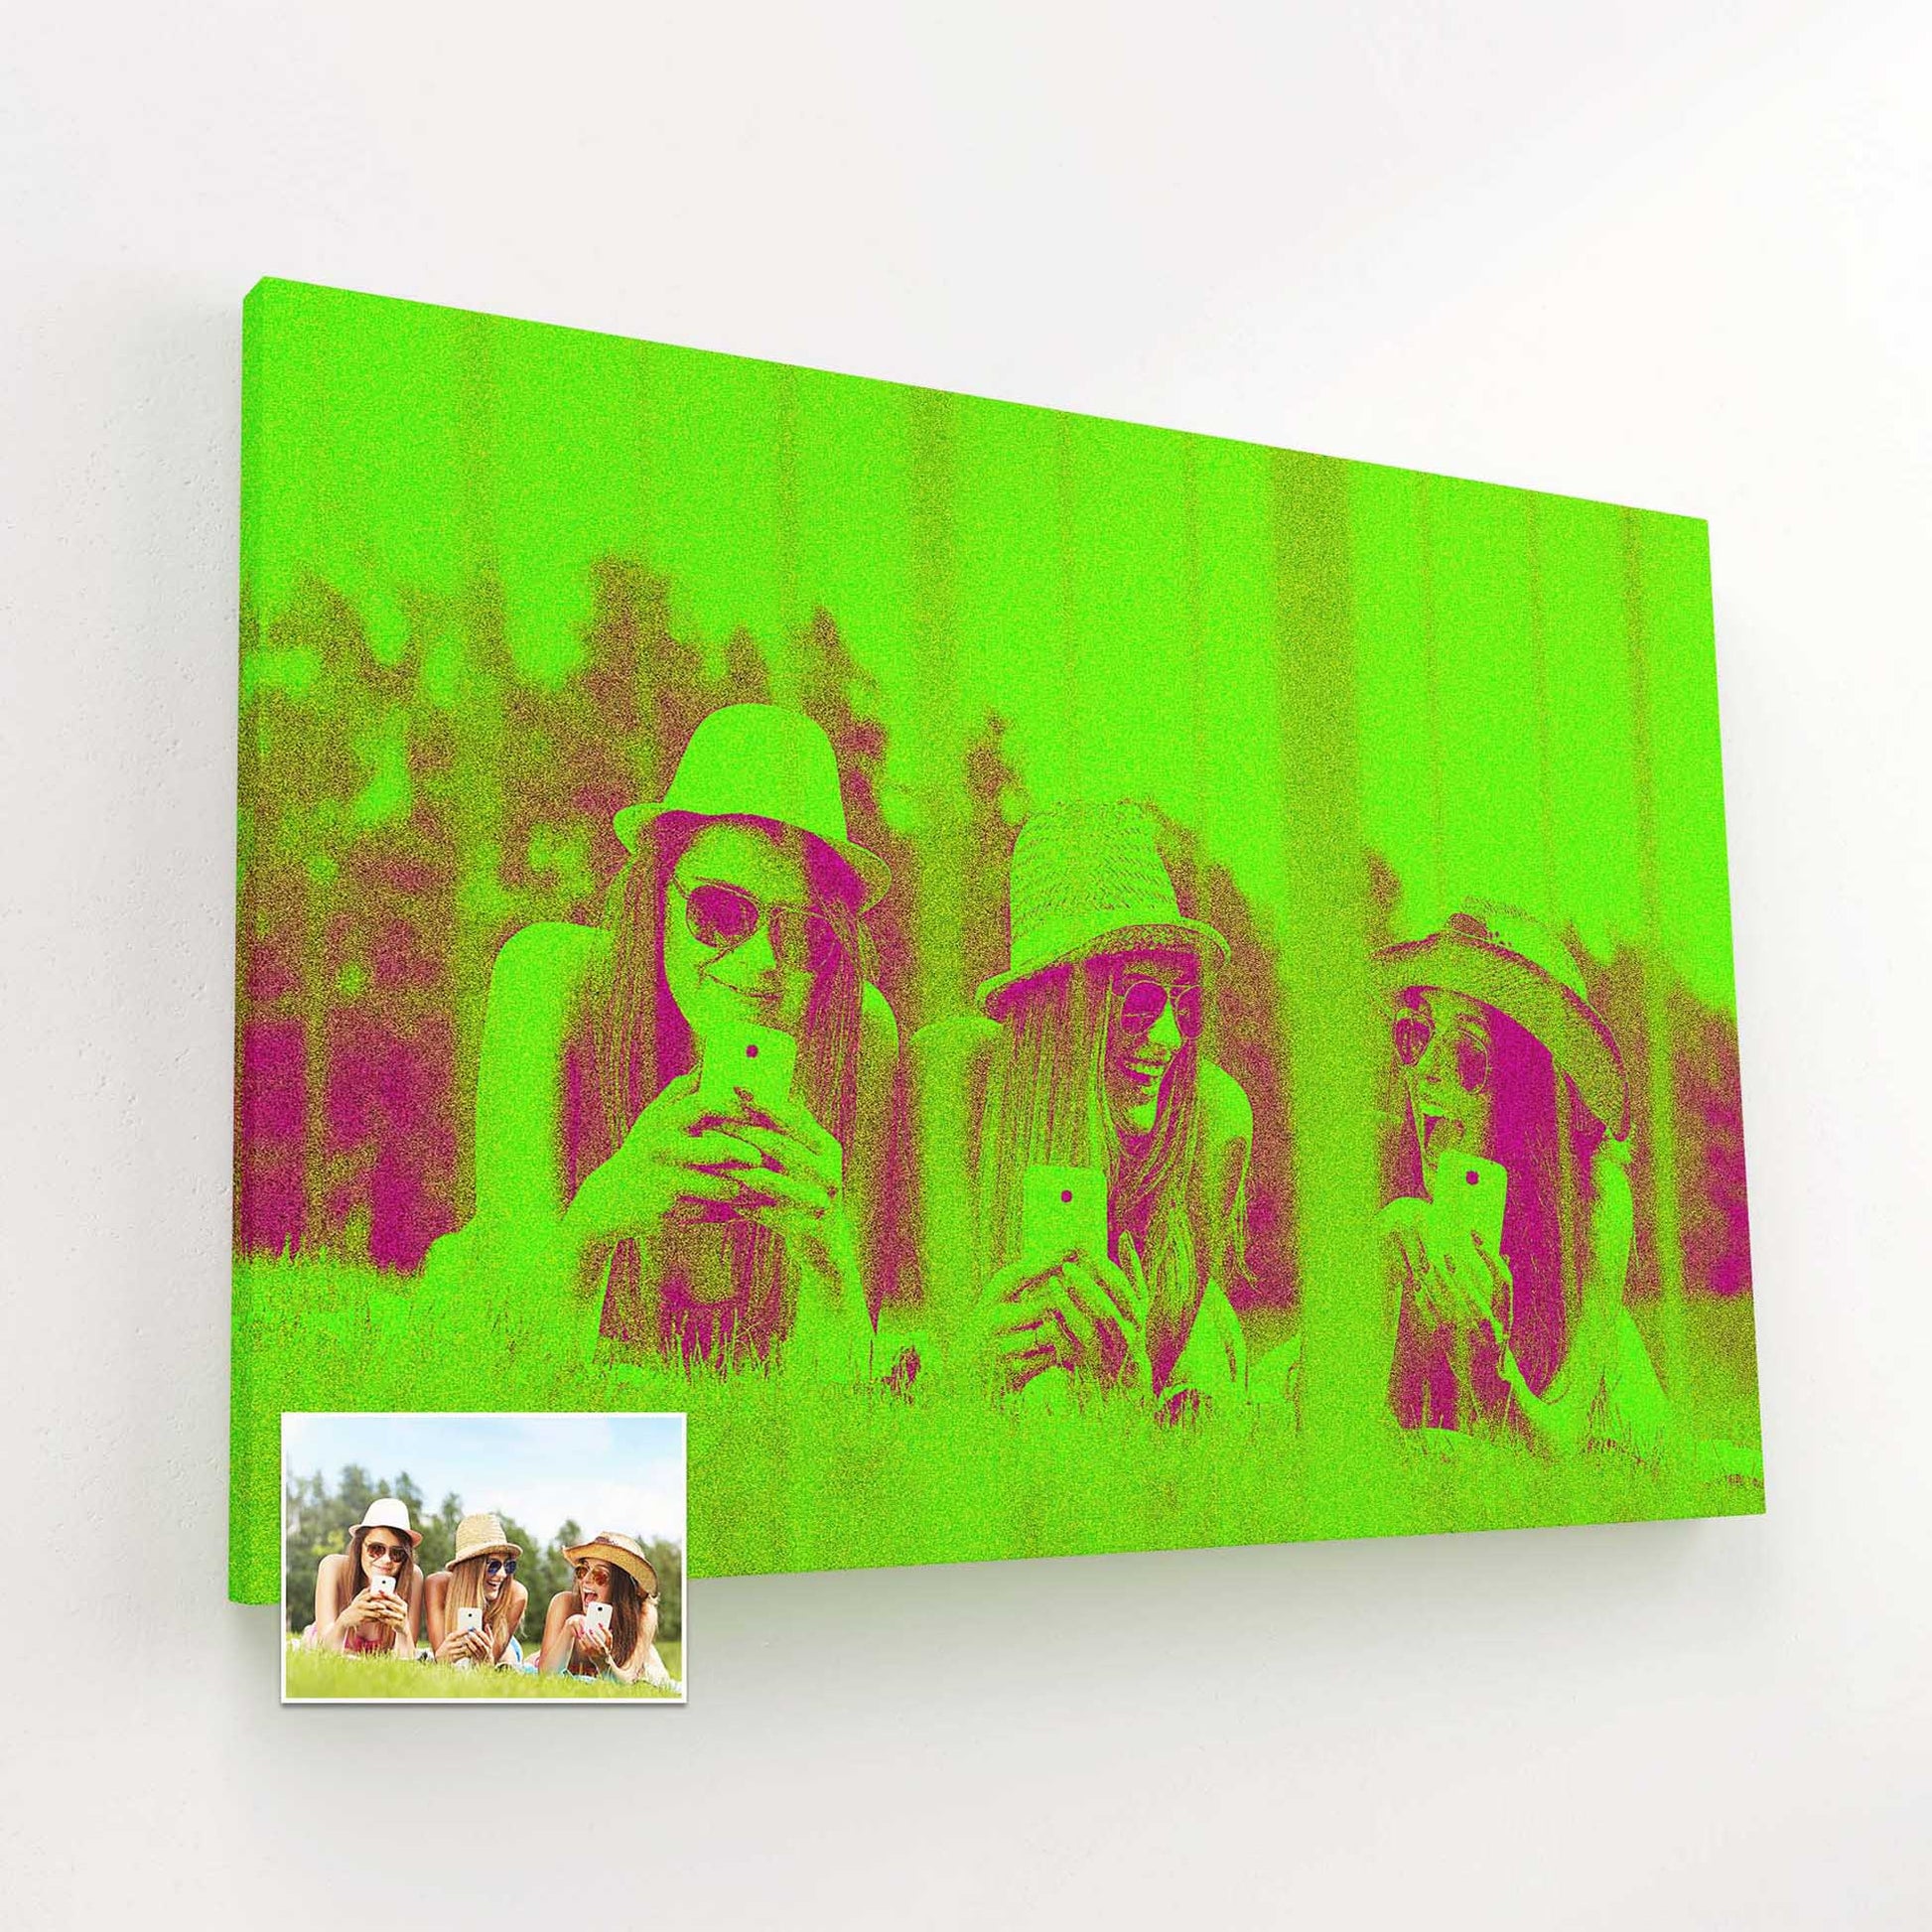 Transform your cherished memories into vibrant art with our personalised neon green canvas. Each piece is handcrafted with care, painting from your photo to capture the essence of your special moments